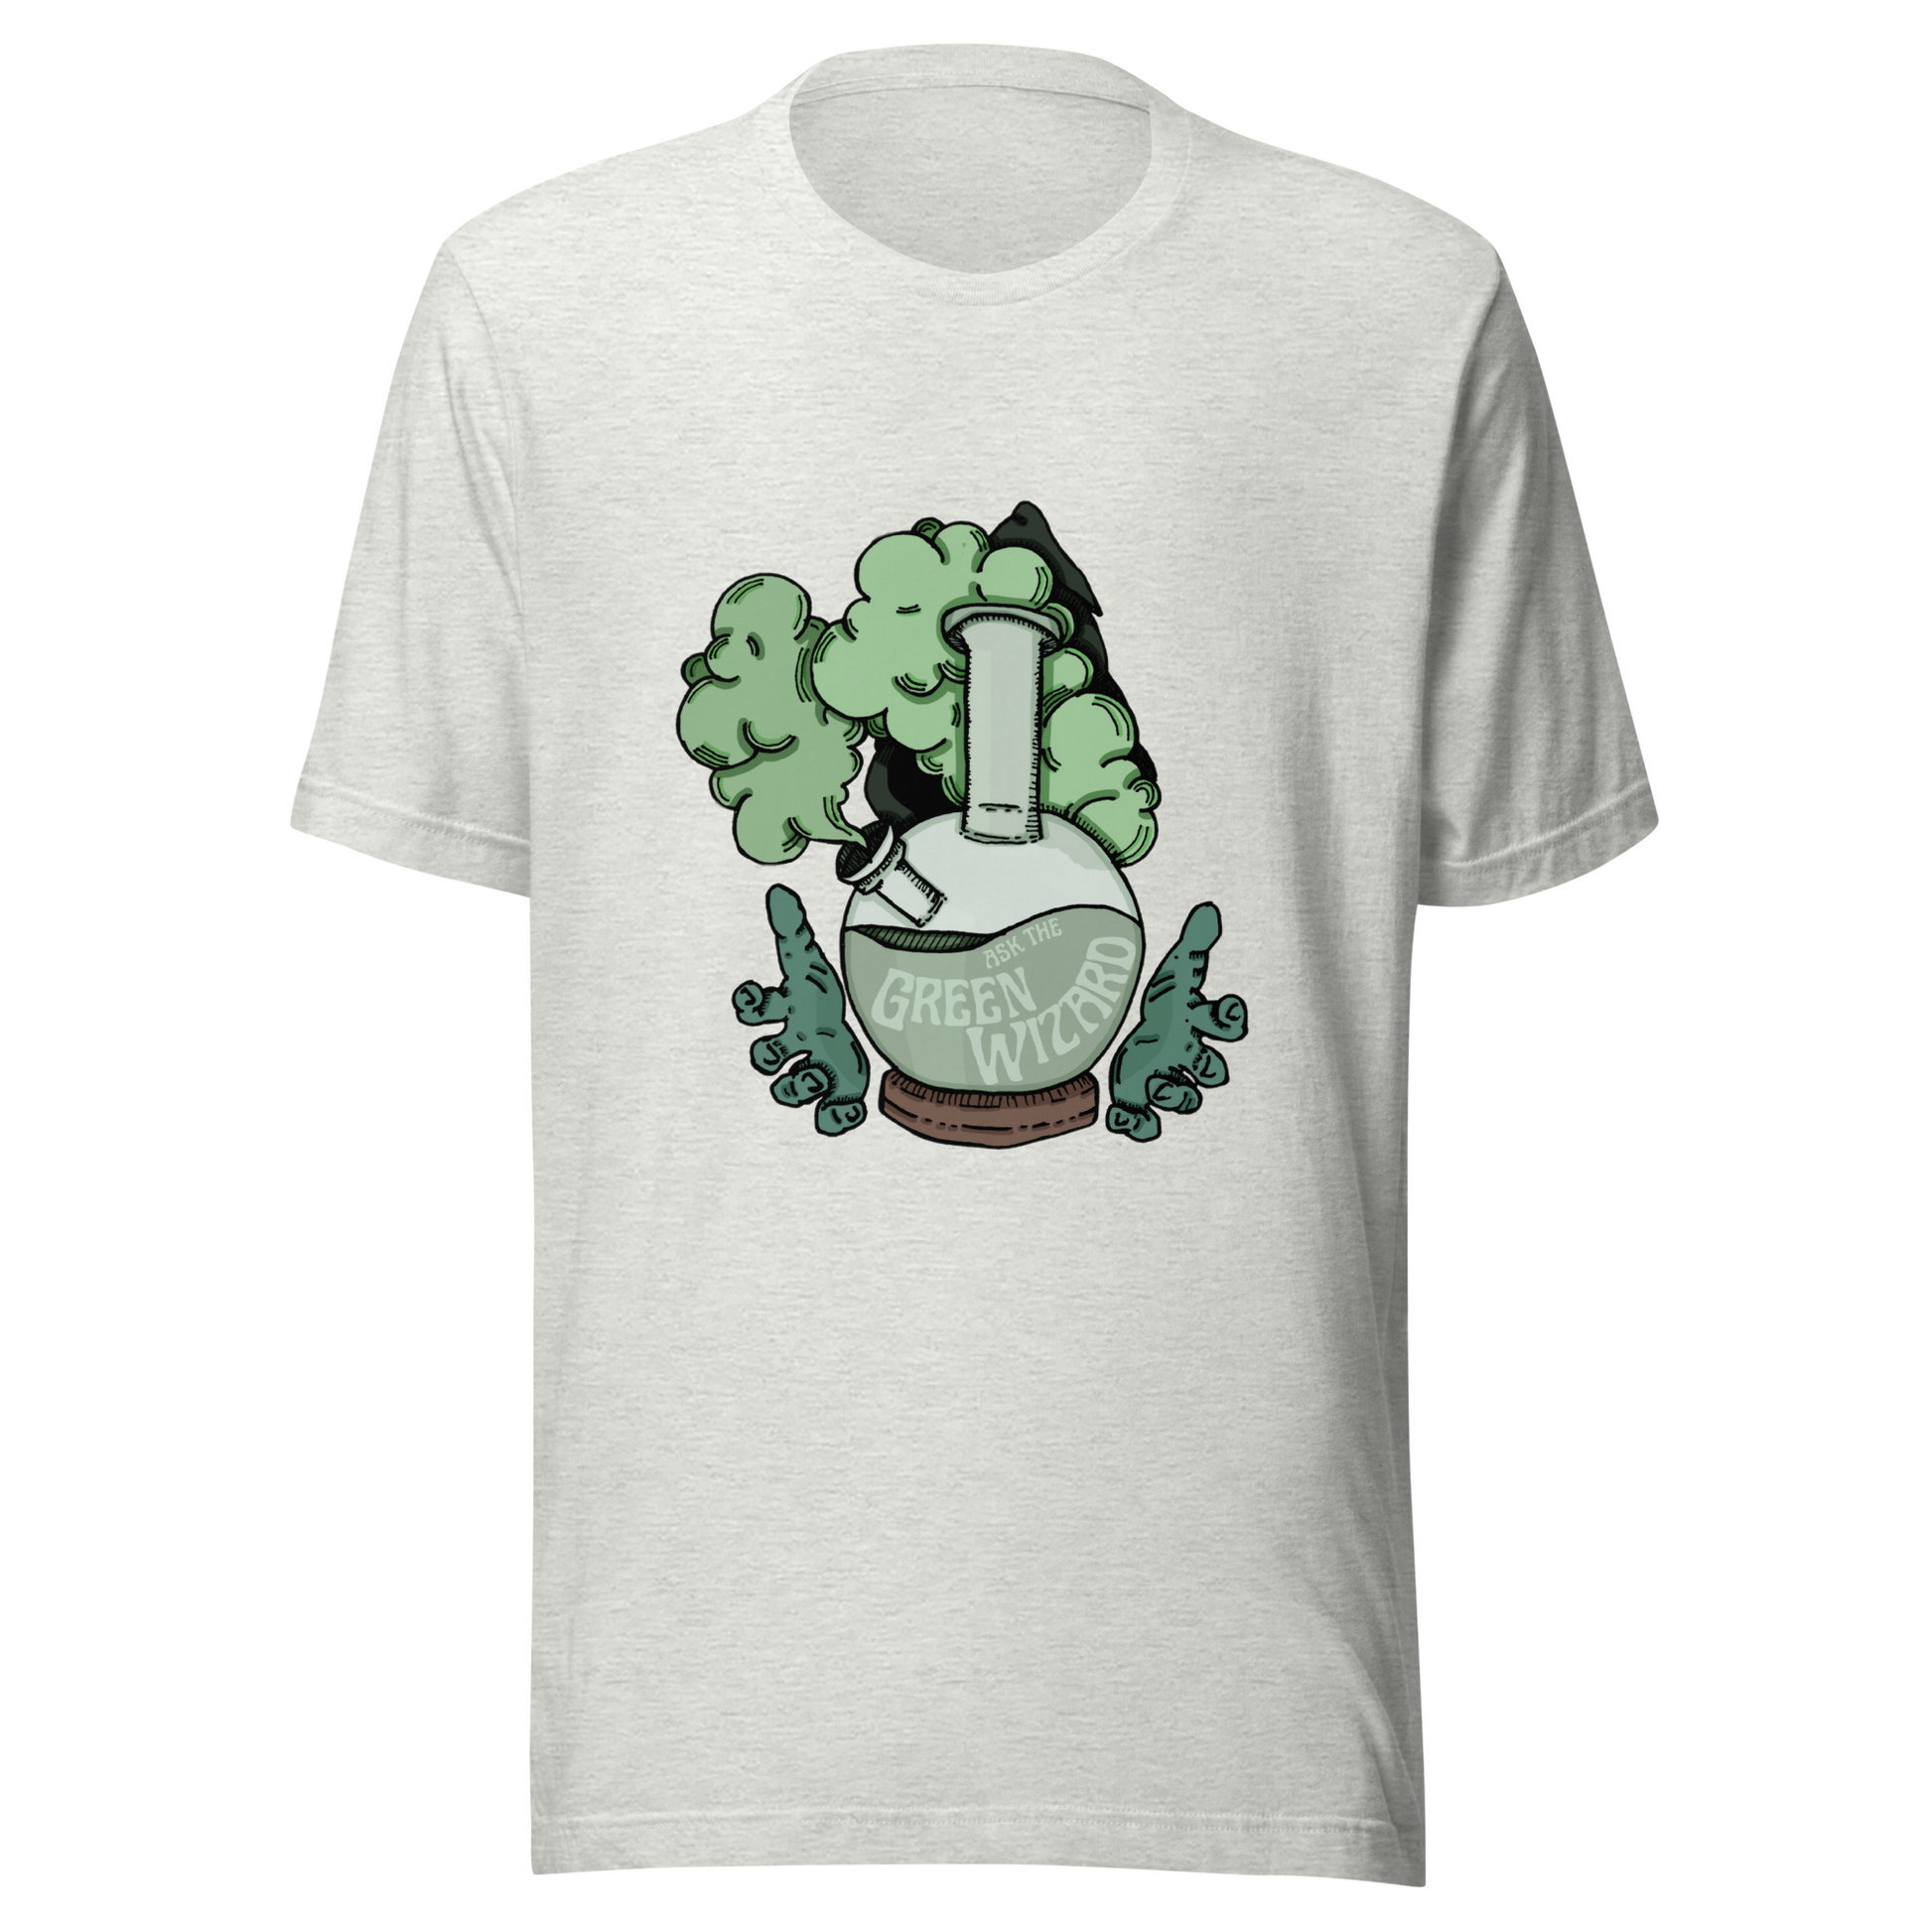 ask the green wizard t-shirt in white - gaslit apparel